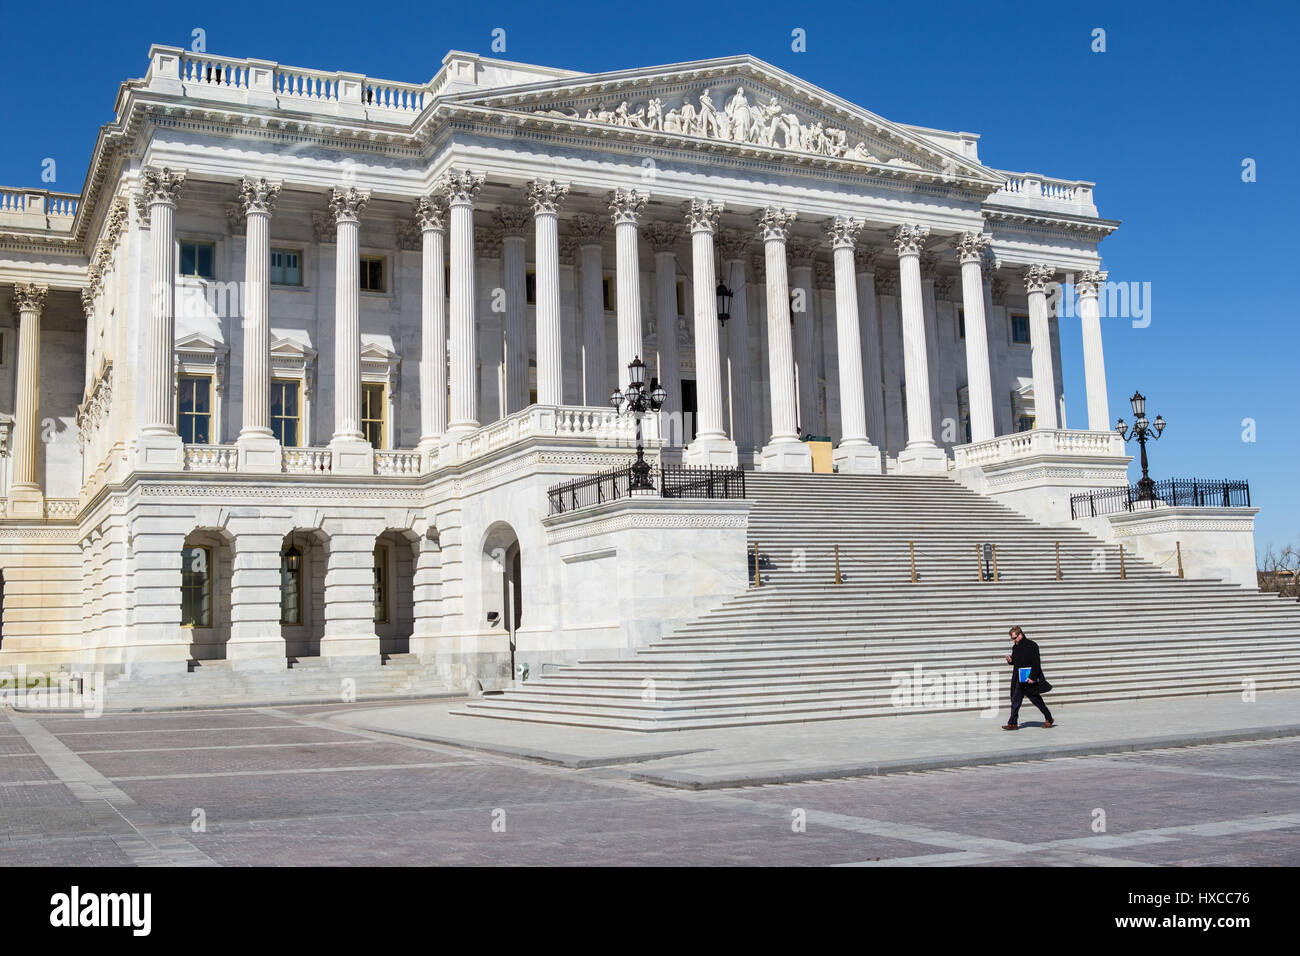 A man walks past the north wing (Senate wing) of the U.S. Capitol Building in Washington, DC. Stock Photo